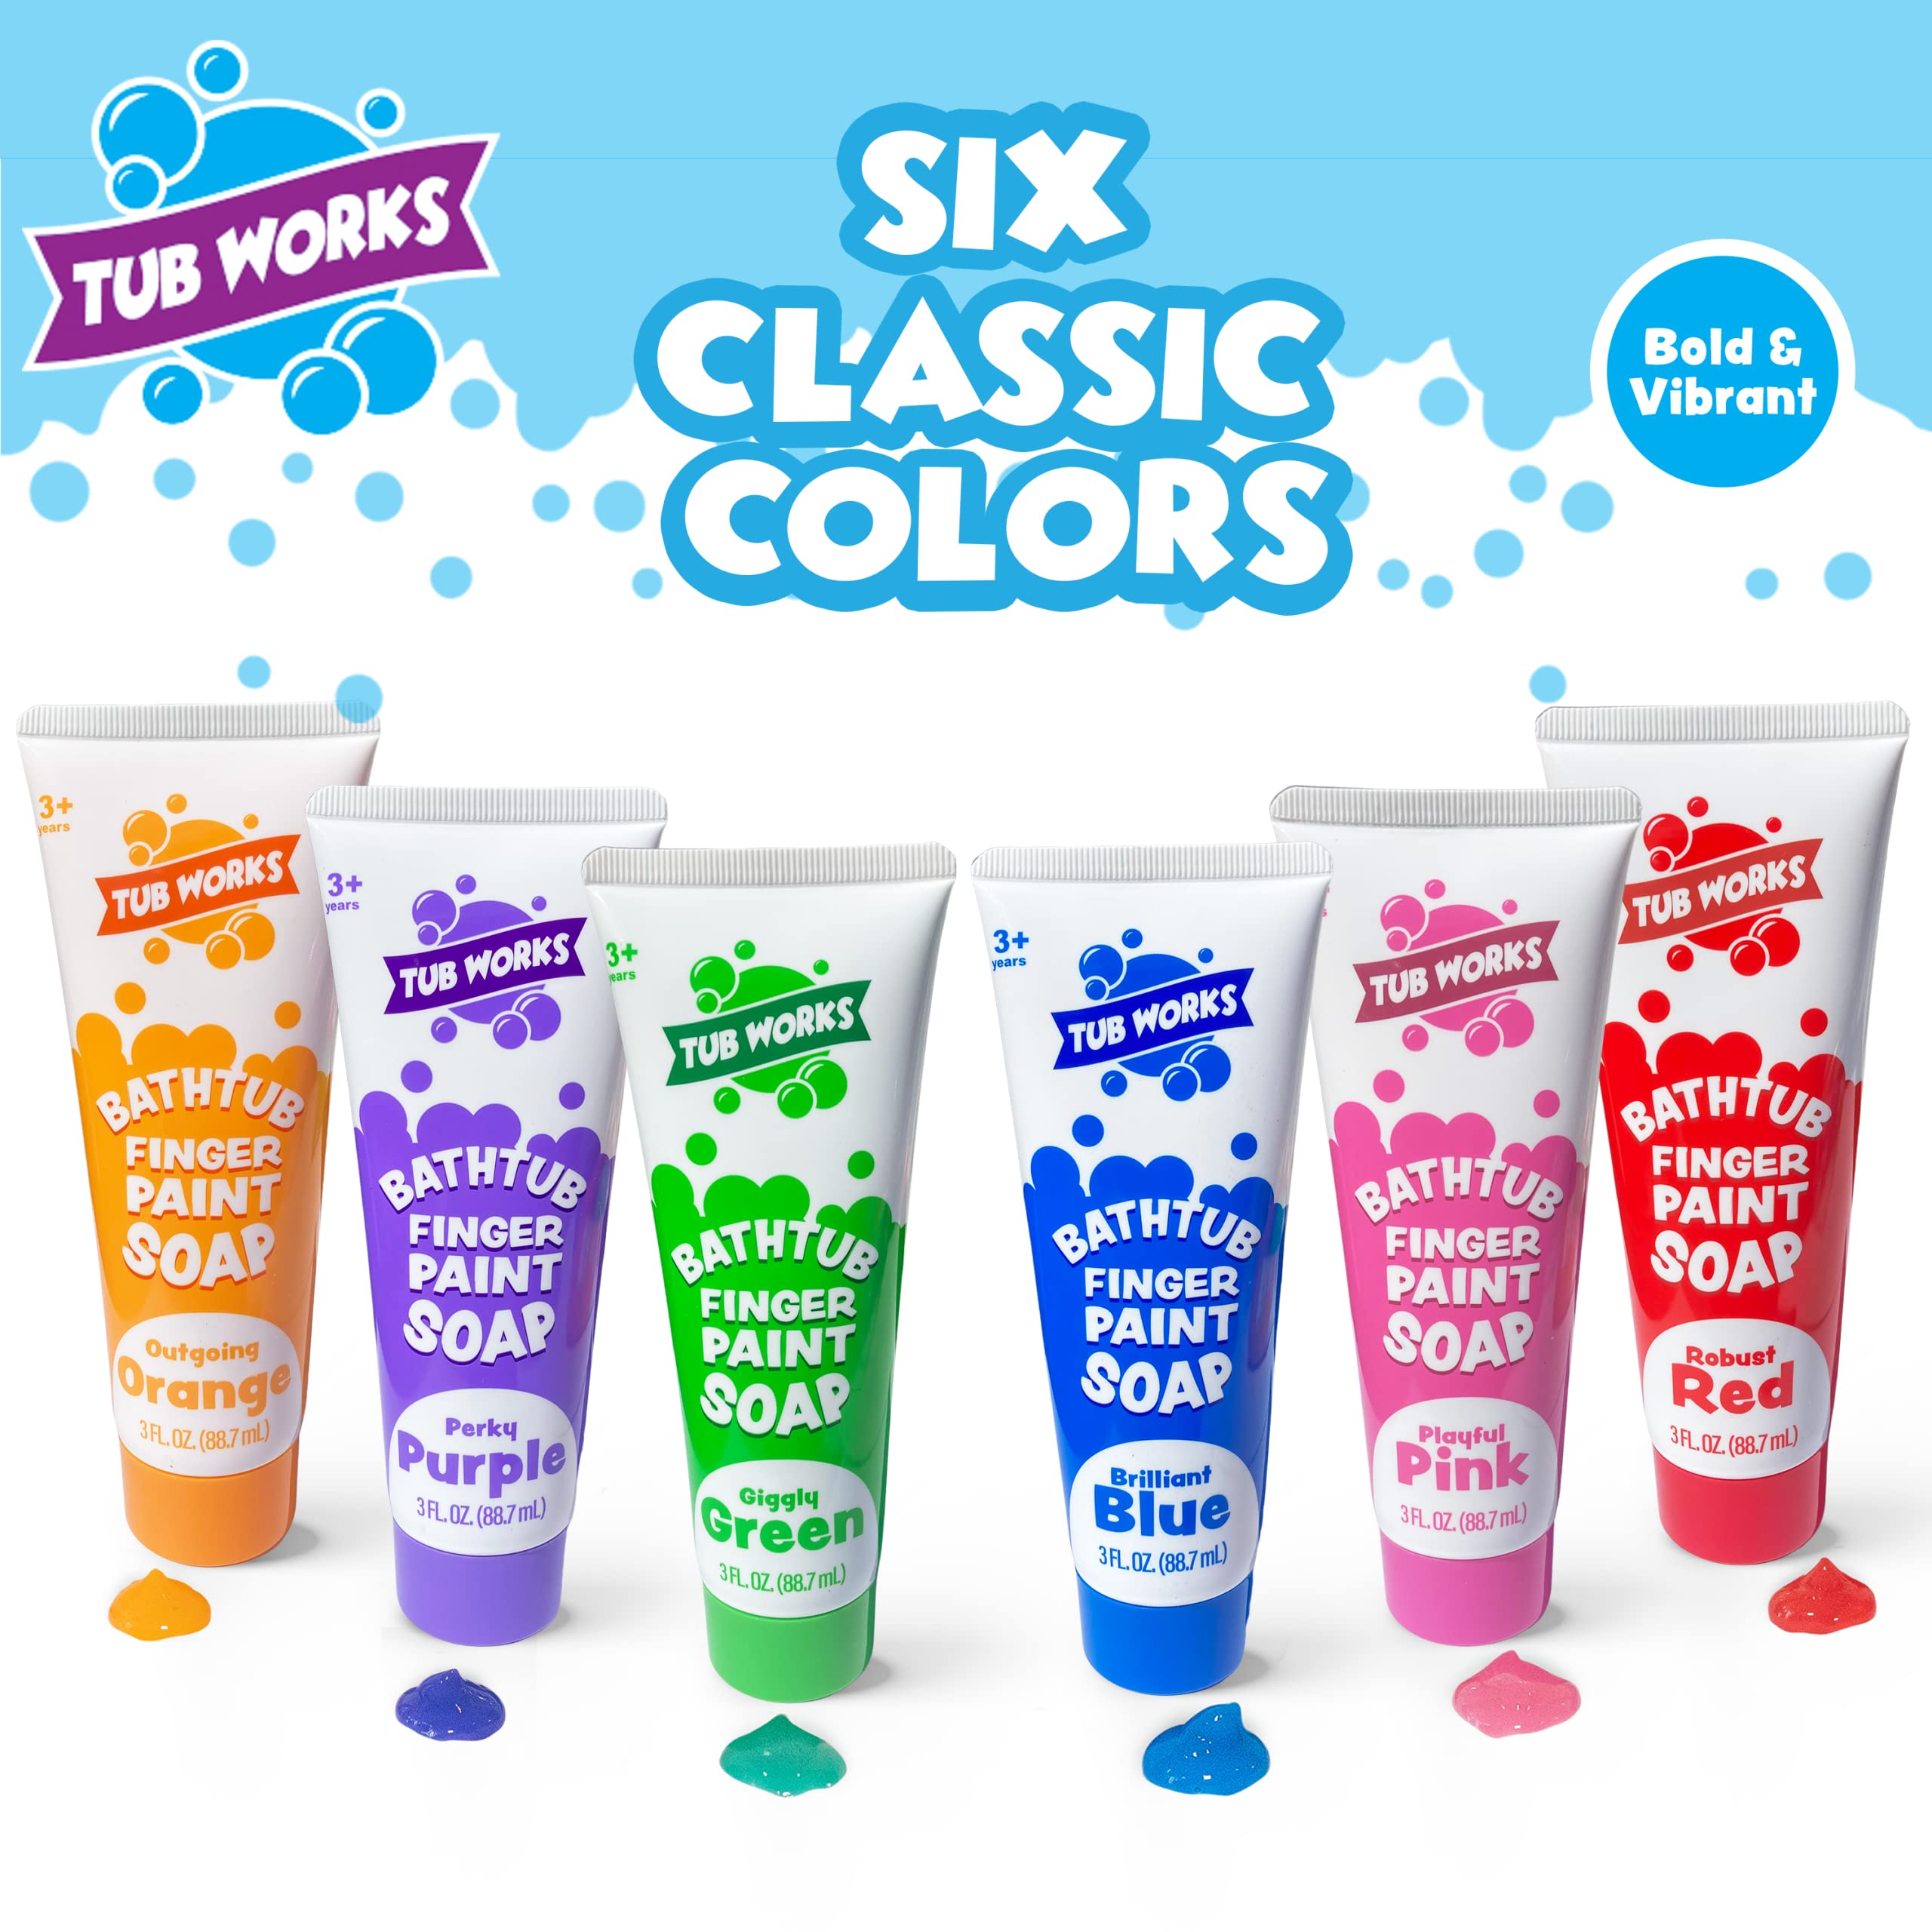 Tub Works™ Bathtub Finger Paint Soap, Classic 6 Pack | Non-Toxic | Washable Bathtub Paint for Finger Painting on Tub Walls | Ideal Toddler Bath Toys for Creative Play | Easy to Clean, Fun Bath Paint